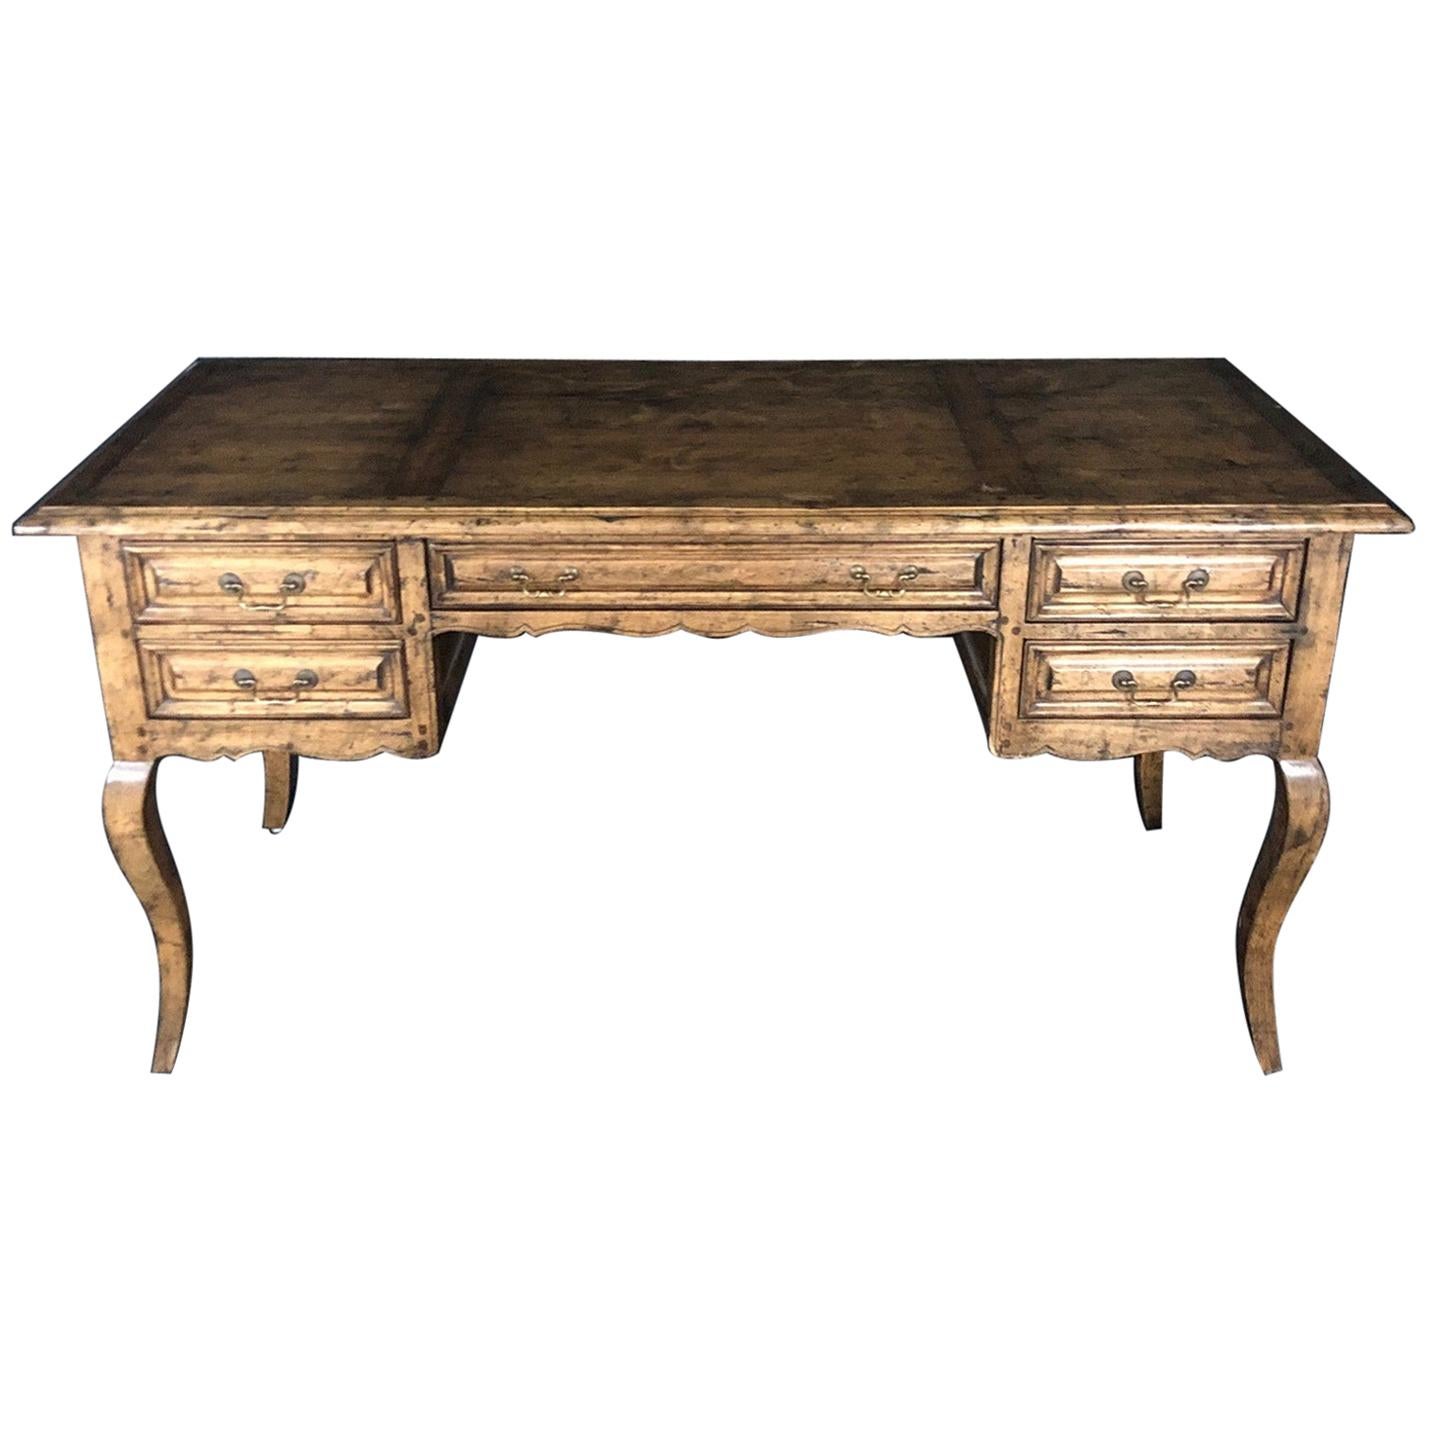 Beautiful Country French Provincial Desk by Guy Chaddock